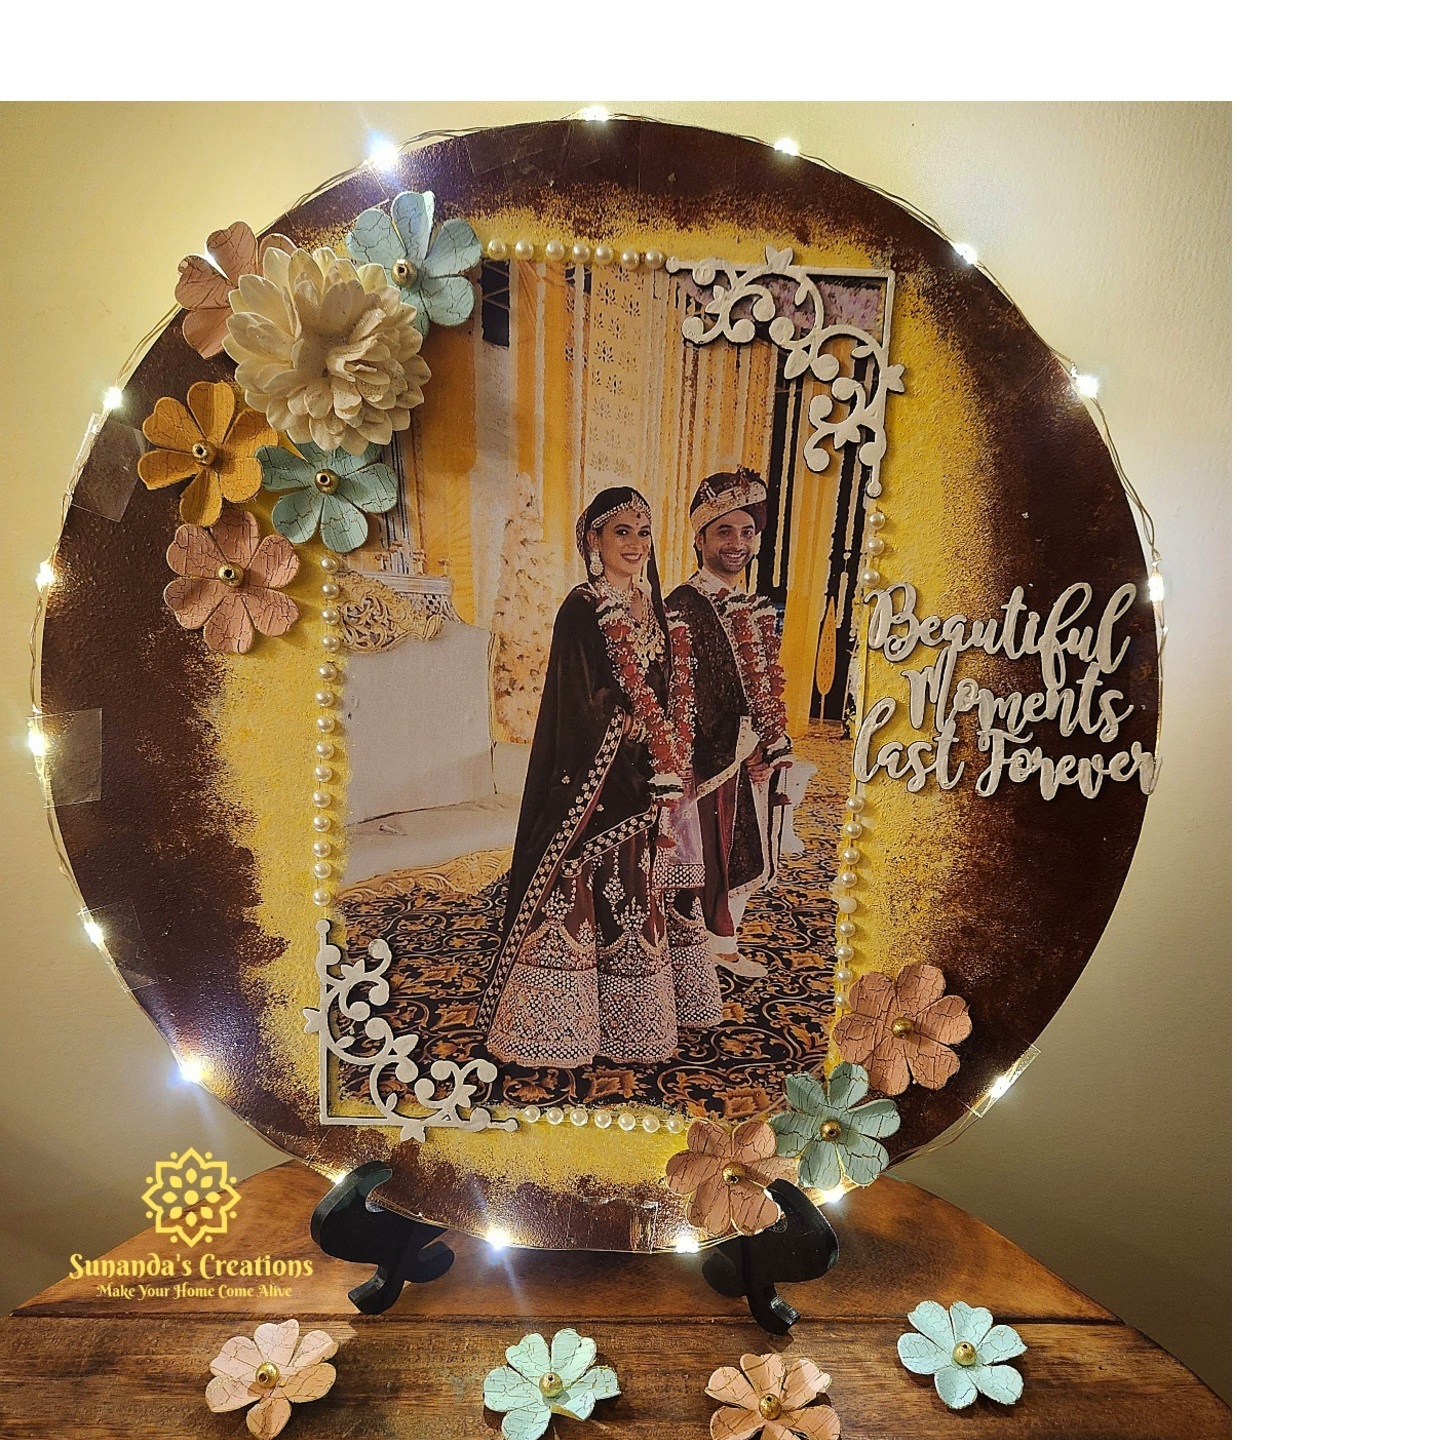 Personalized Photo Plate/ Mixed media/ Hand painted (Light & Acrylic stand included)